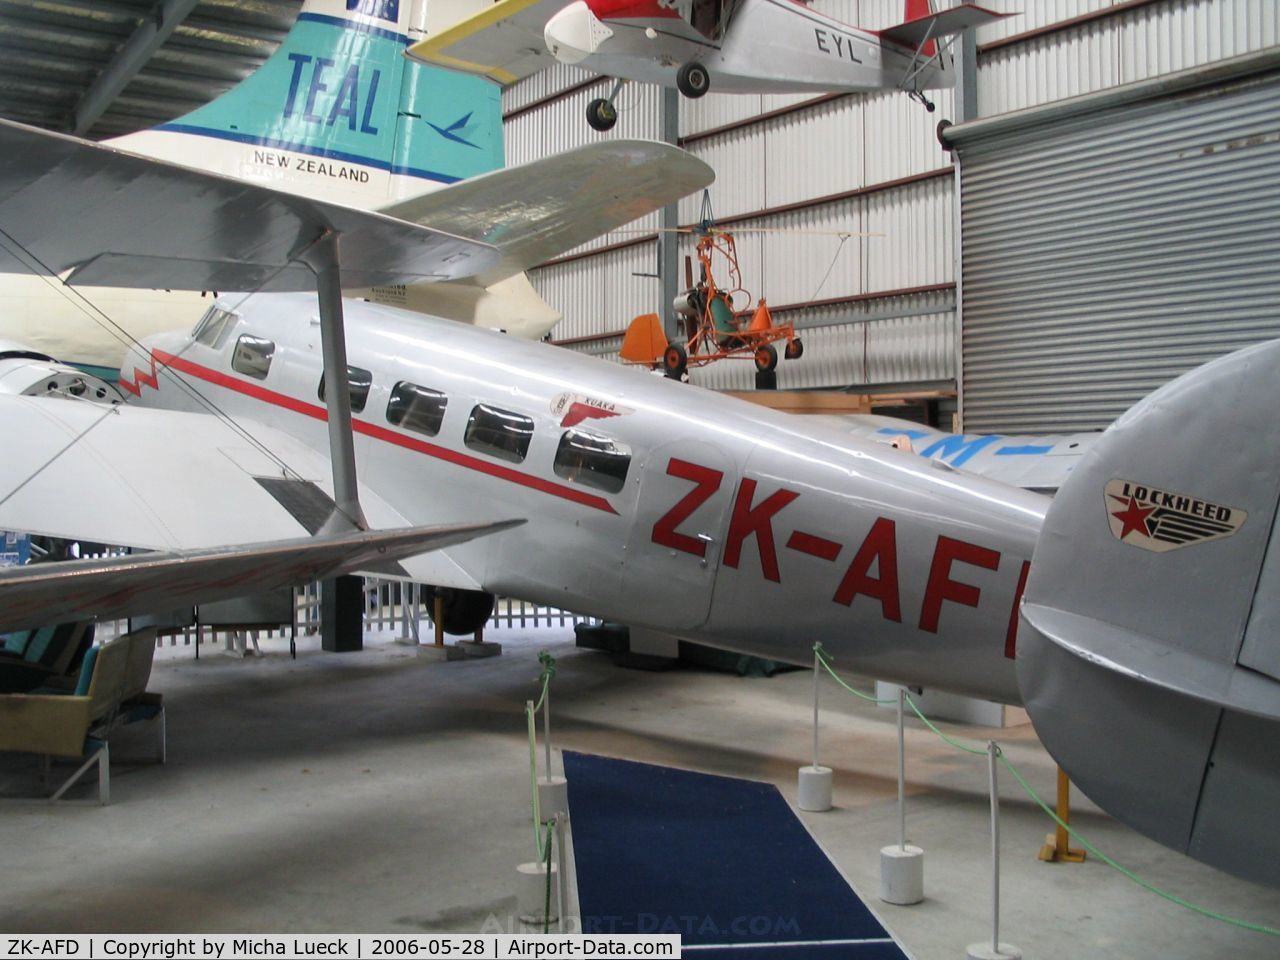 ZK-AFD, 1937 Lockheed 10A Electra C/N 1095, Lockheed Electra 10A (1937), preserved at the Museum of Transport and Technology (MOTAT) in Auckland, New Zealand